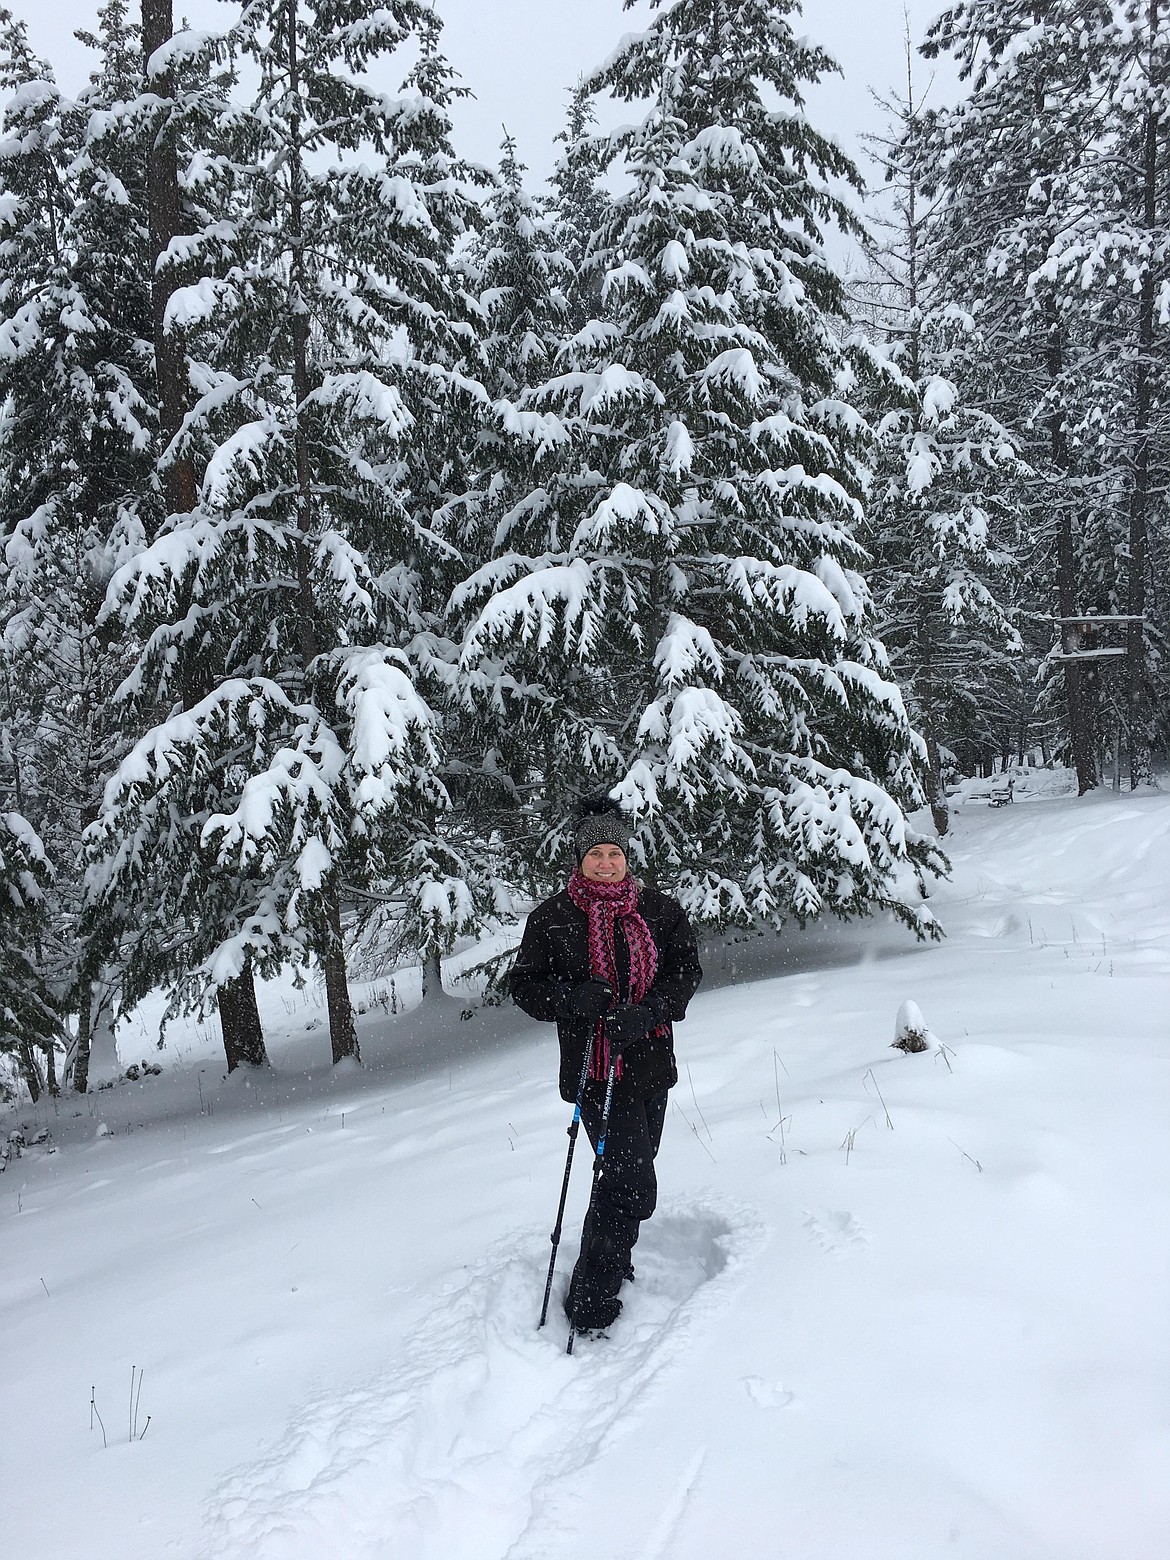 "Snow shoeing in our own backyard in Coeur d’Alene." (Photo by Danine Harnes)